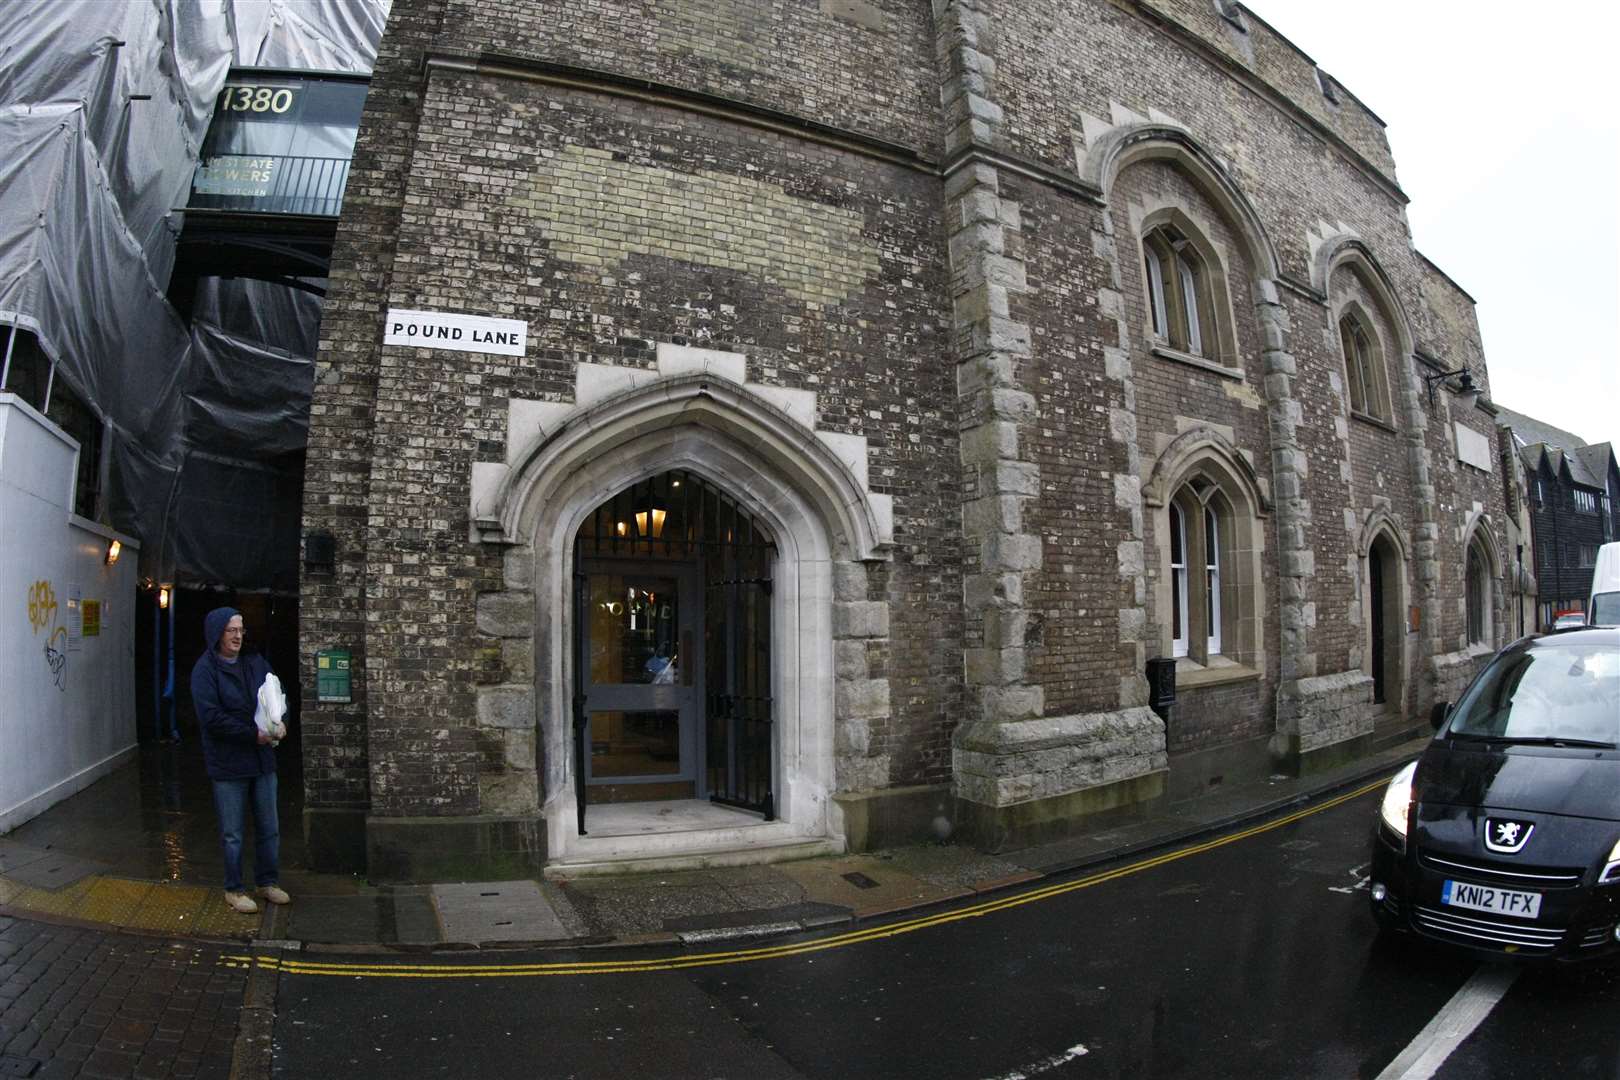 The former gaol has been converted into a restaurant